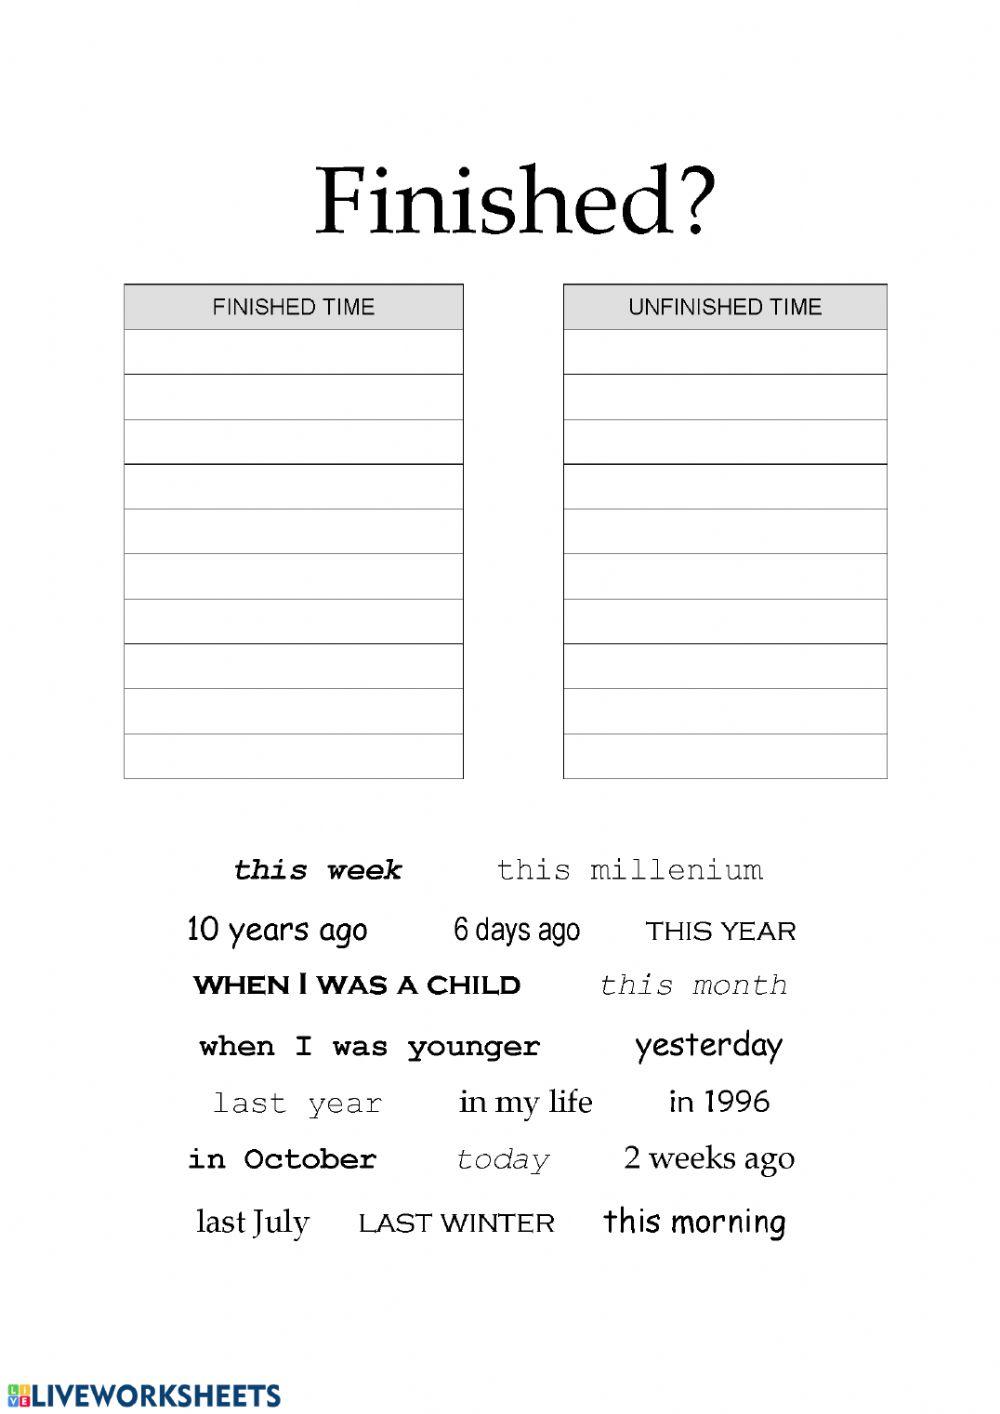 Present perfect or past simple finished or unfinished - time matching